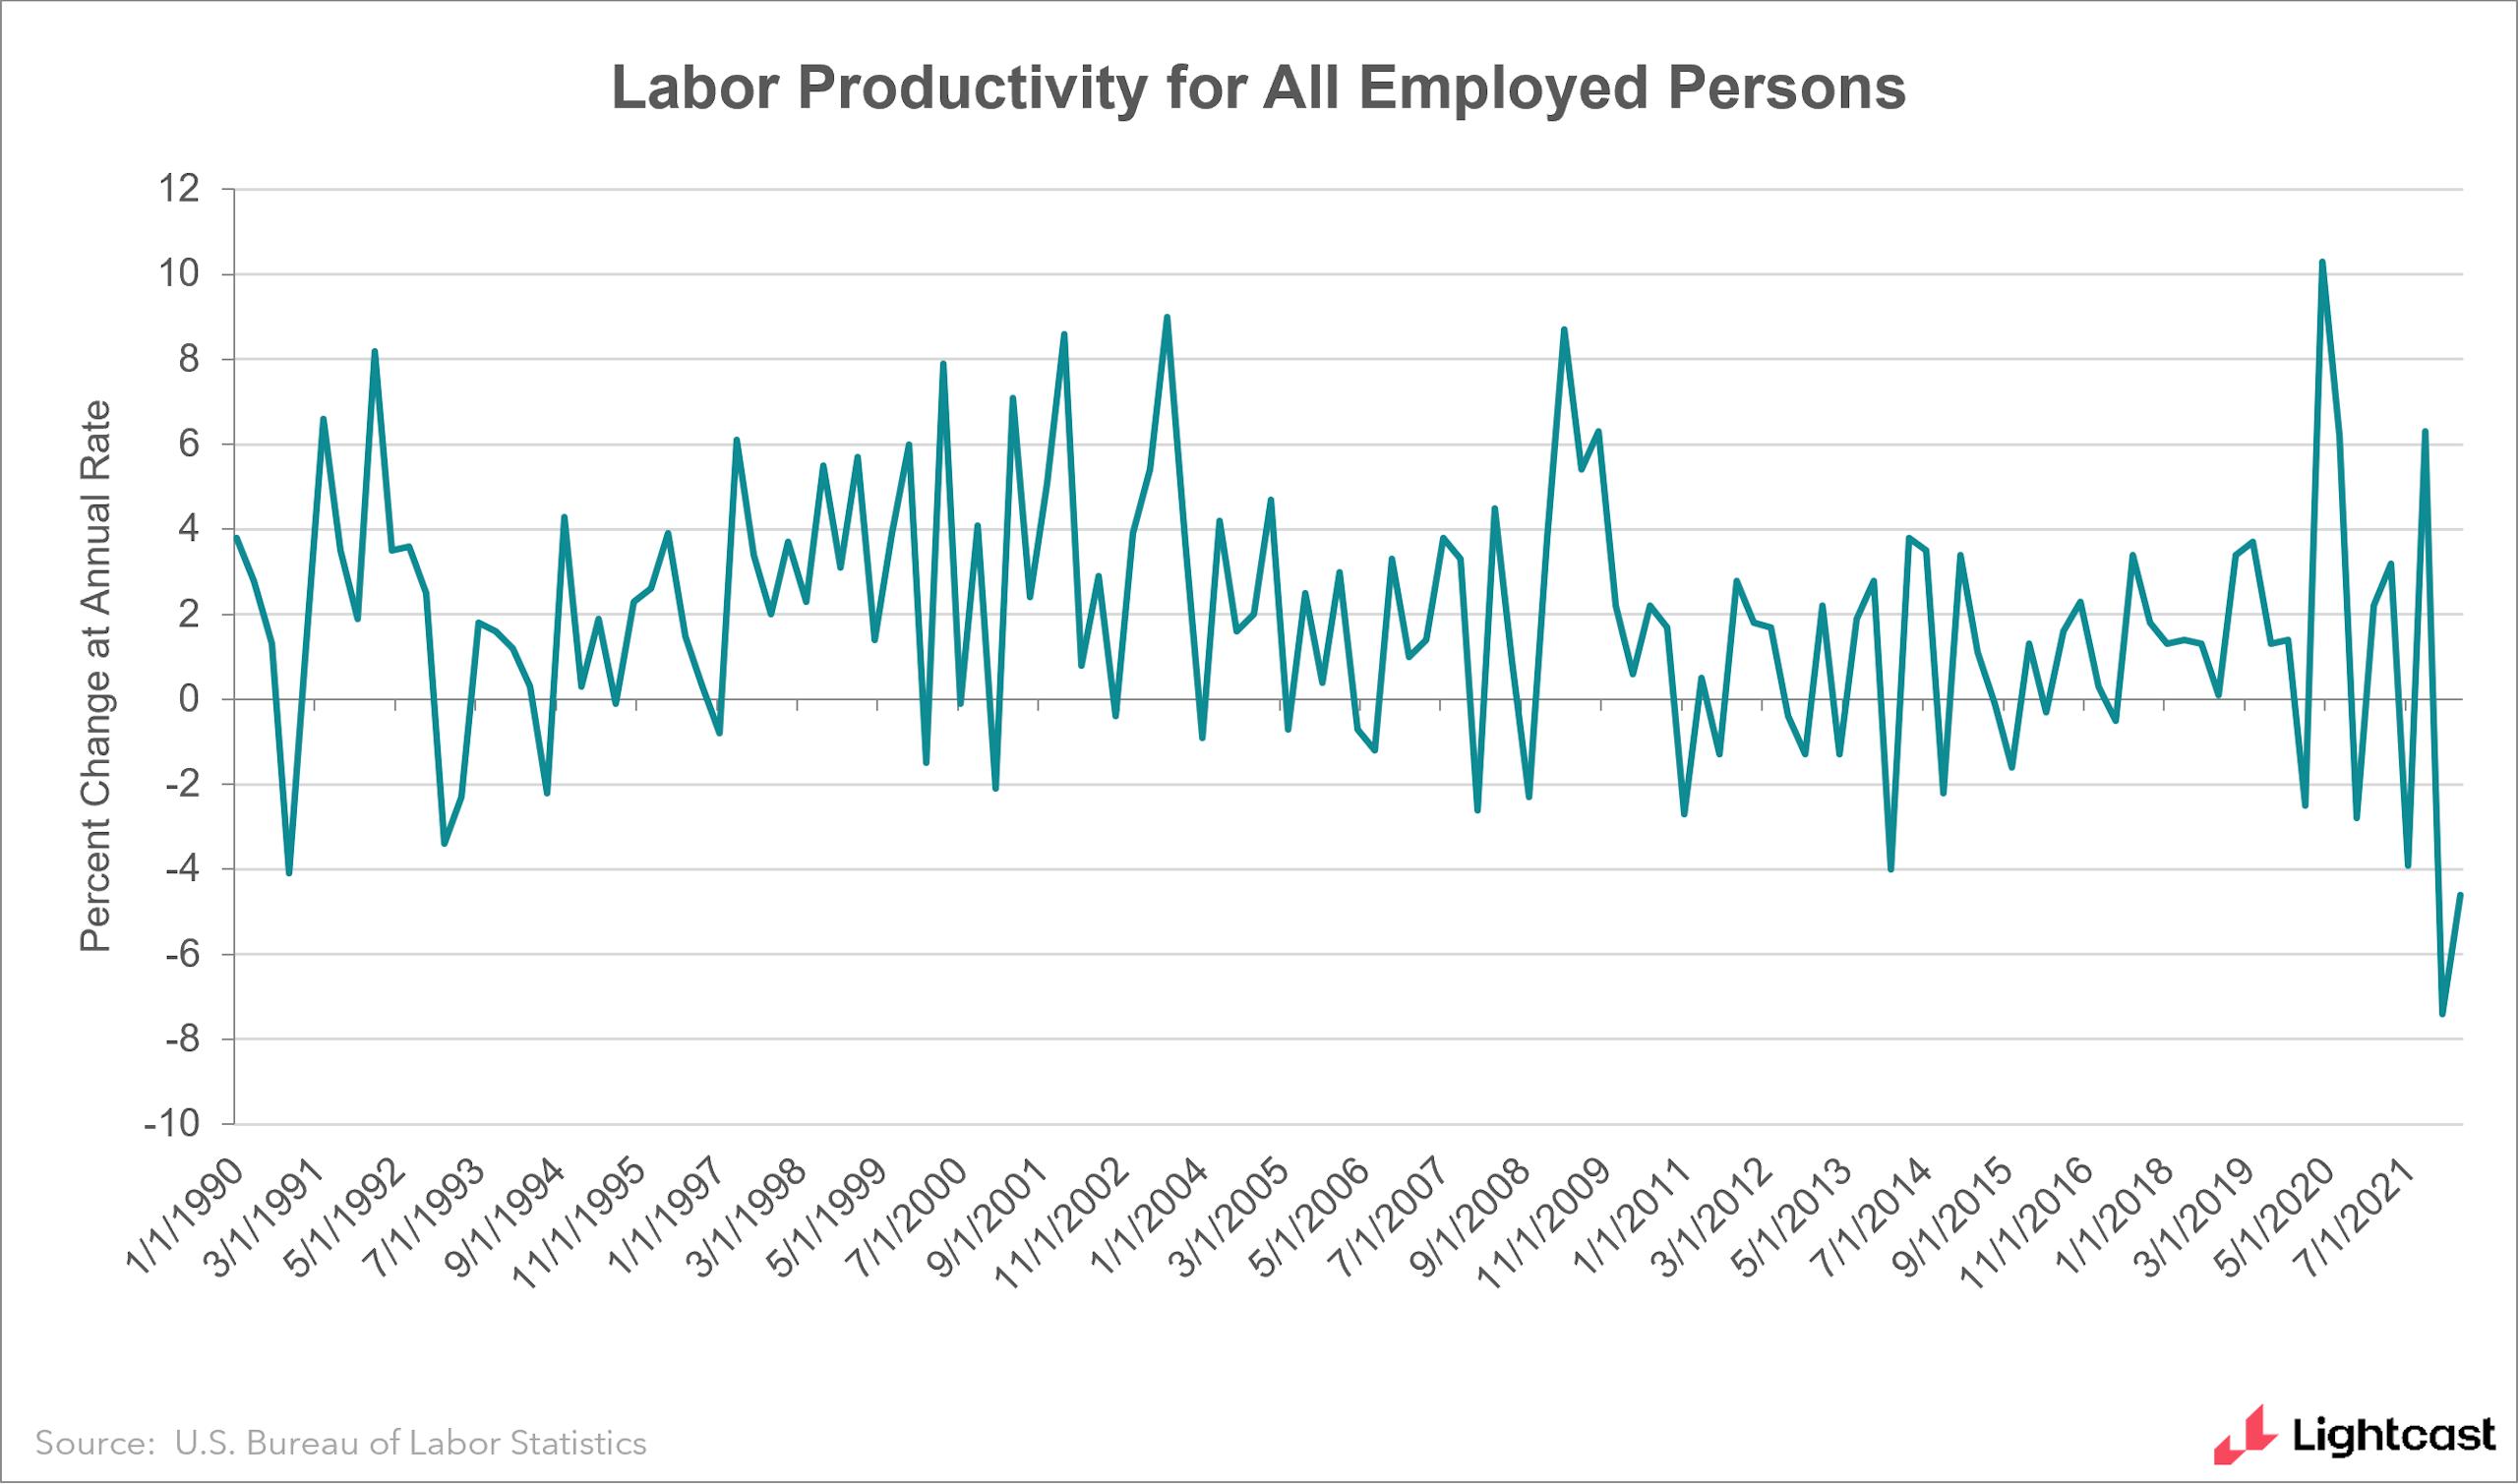 Graph of labor productivity, showing high volatility over time without a clear pattern